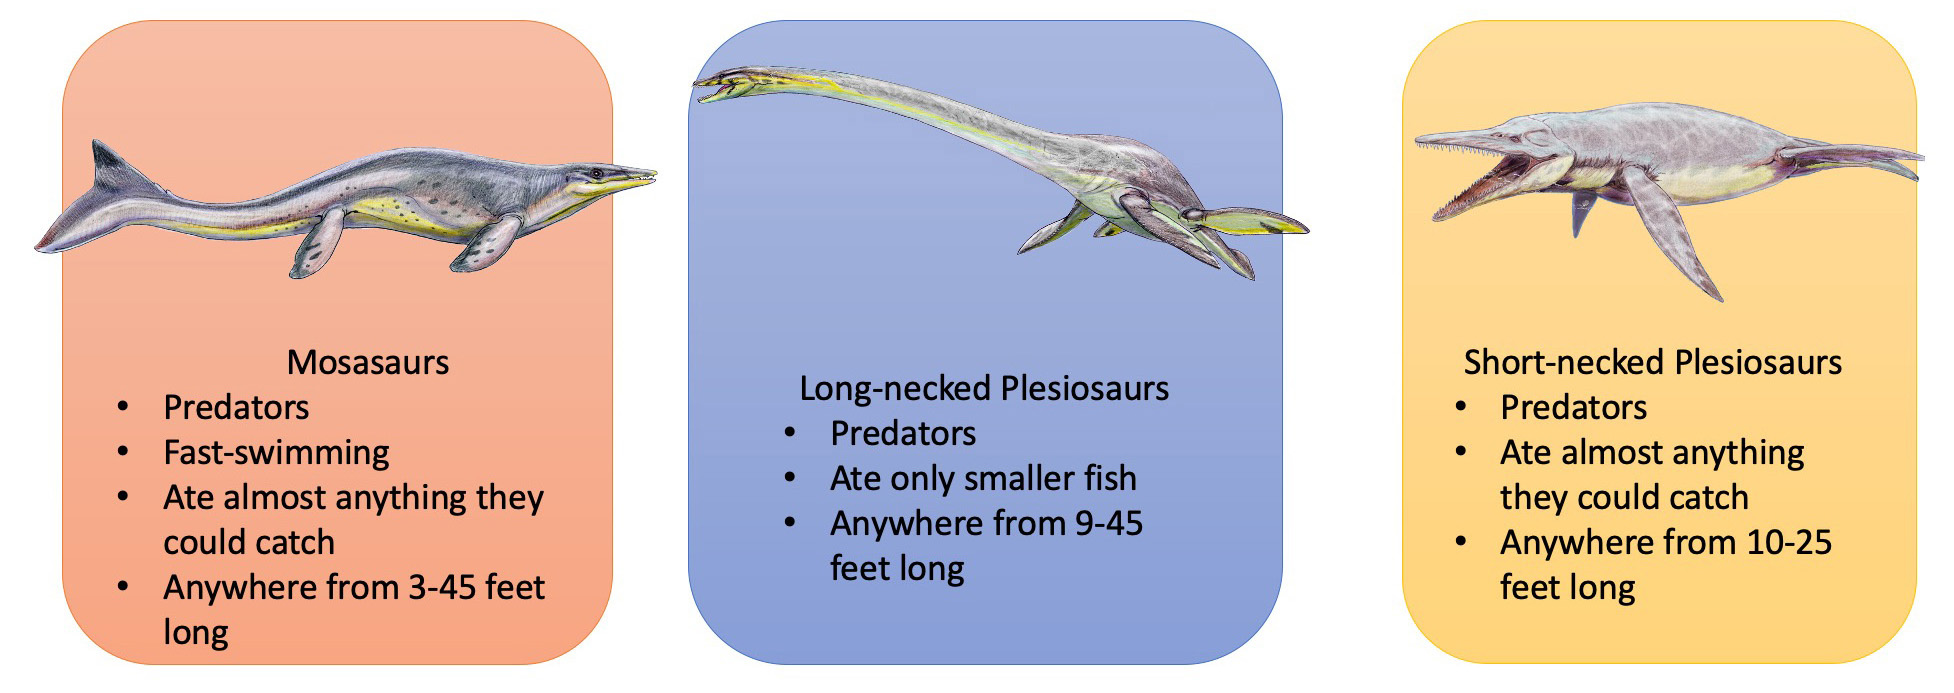 Examples of animals from the Western Interior Seaway, including mosasaurs and long- and short-necked plesiosaurs